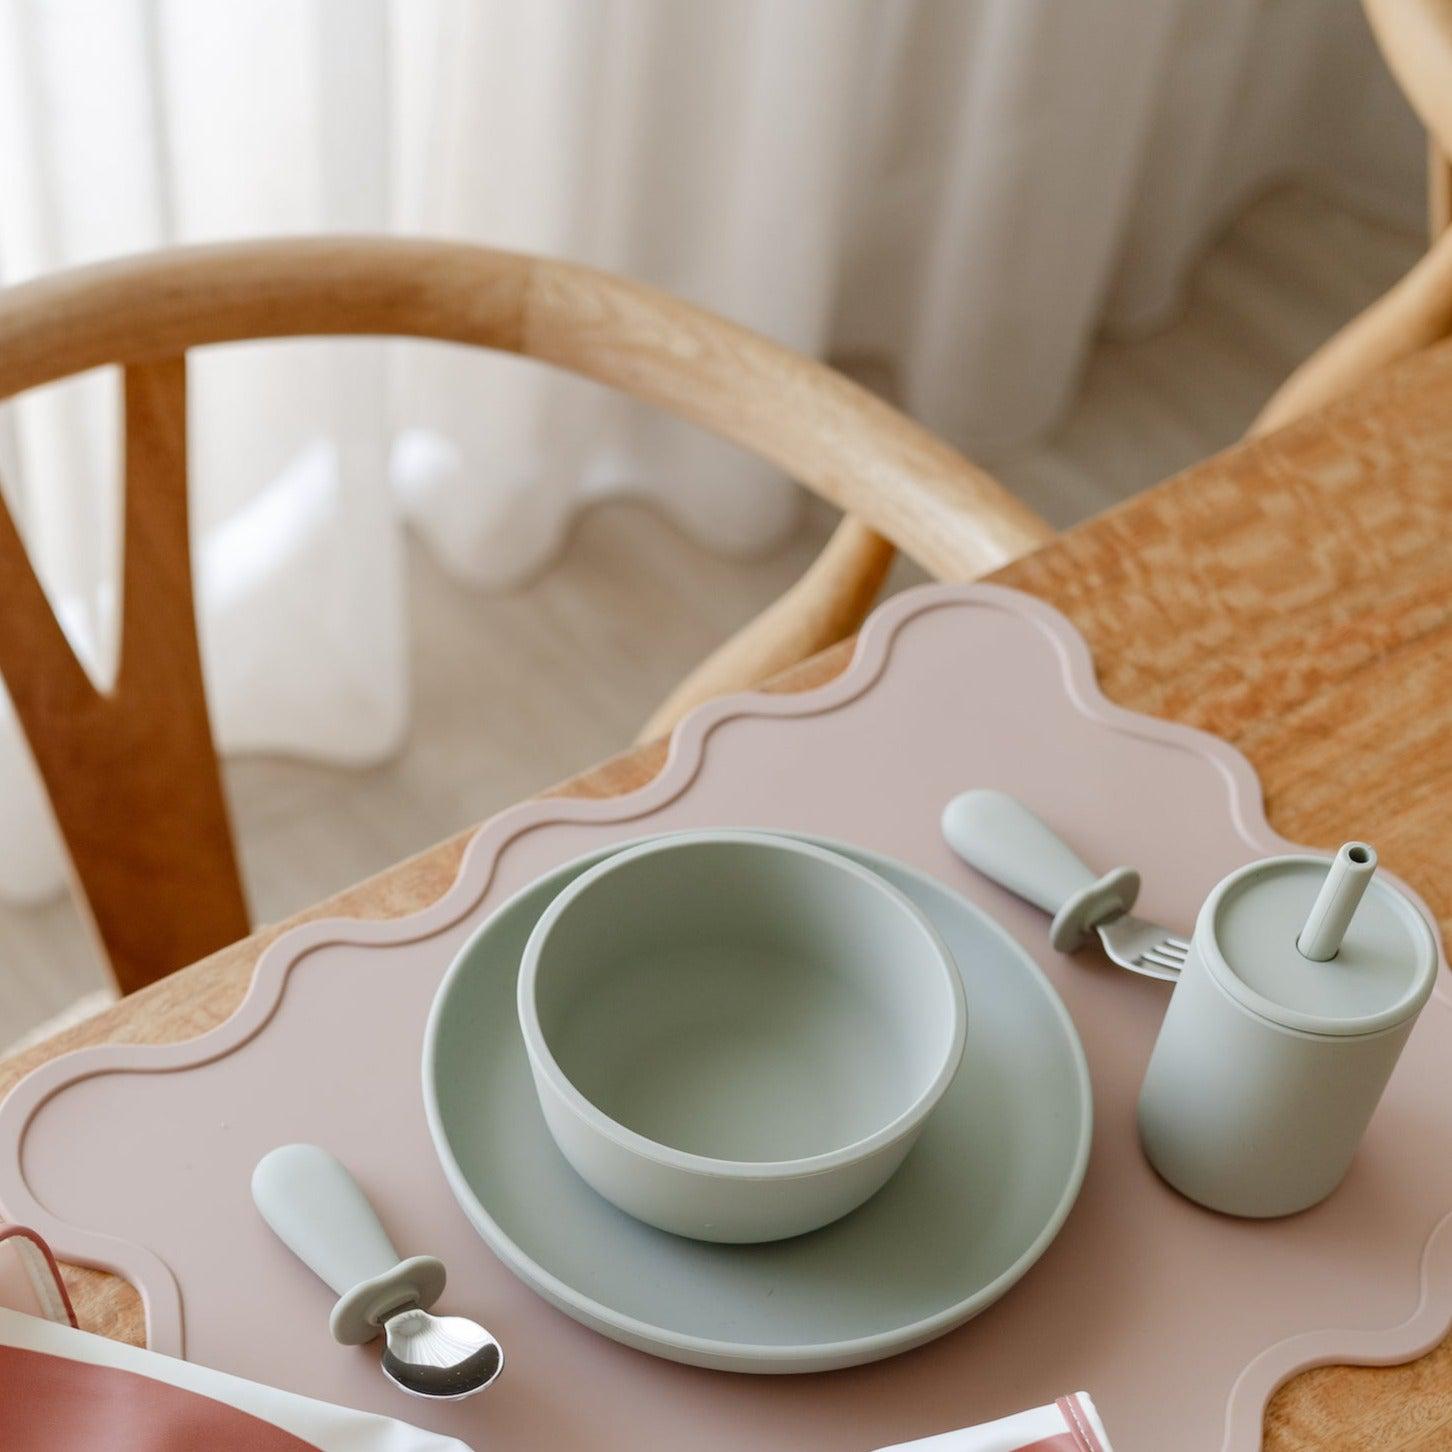 A table setting with a Rommer toddler cutlery set, including a plate, bowl, and spoon, designed to encourage independence during mealtime for curious little hands.